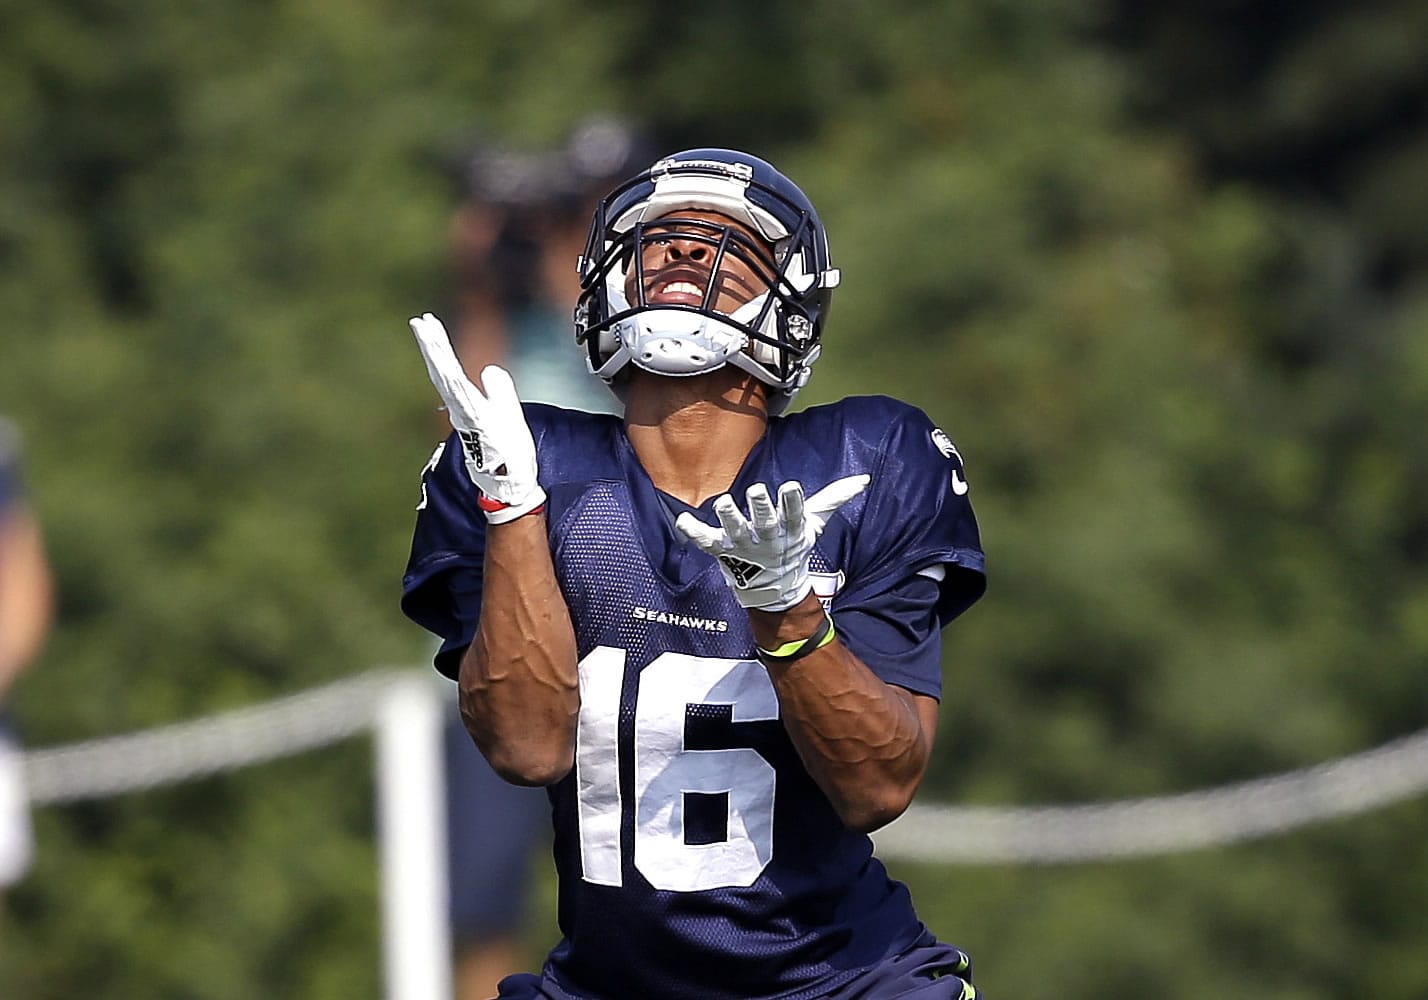 Seattle Seahawks wide receiver Tyler Lockett reaches to catch a ball during NFL football training camp in Friday, Aug. 4, 2017, in Renton, Wash.